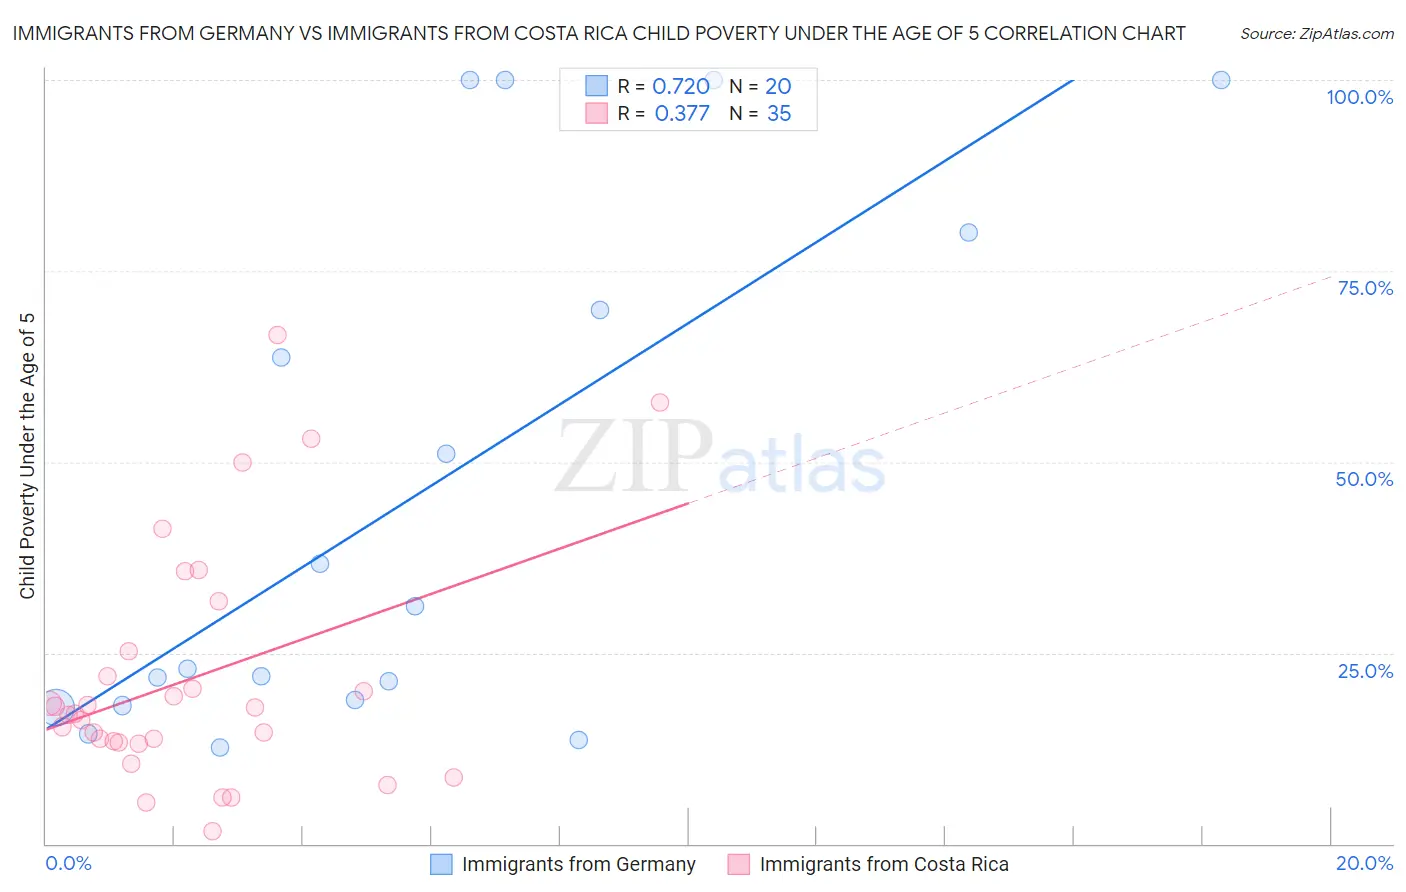 Immigrants from Germany vs Immigrants from Costa Rica Child Poverty Under the Age of 5